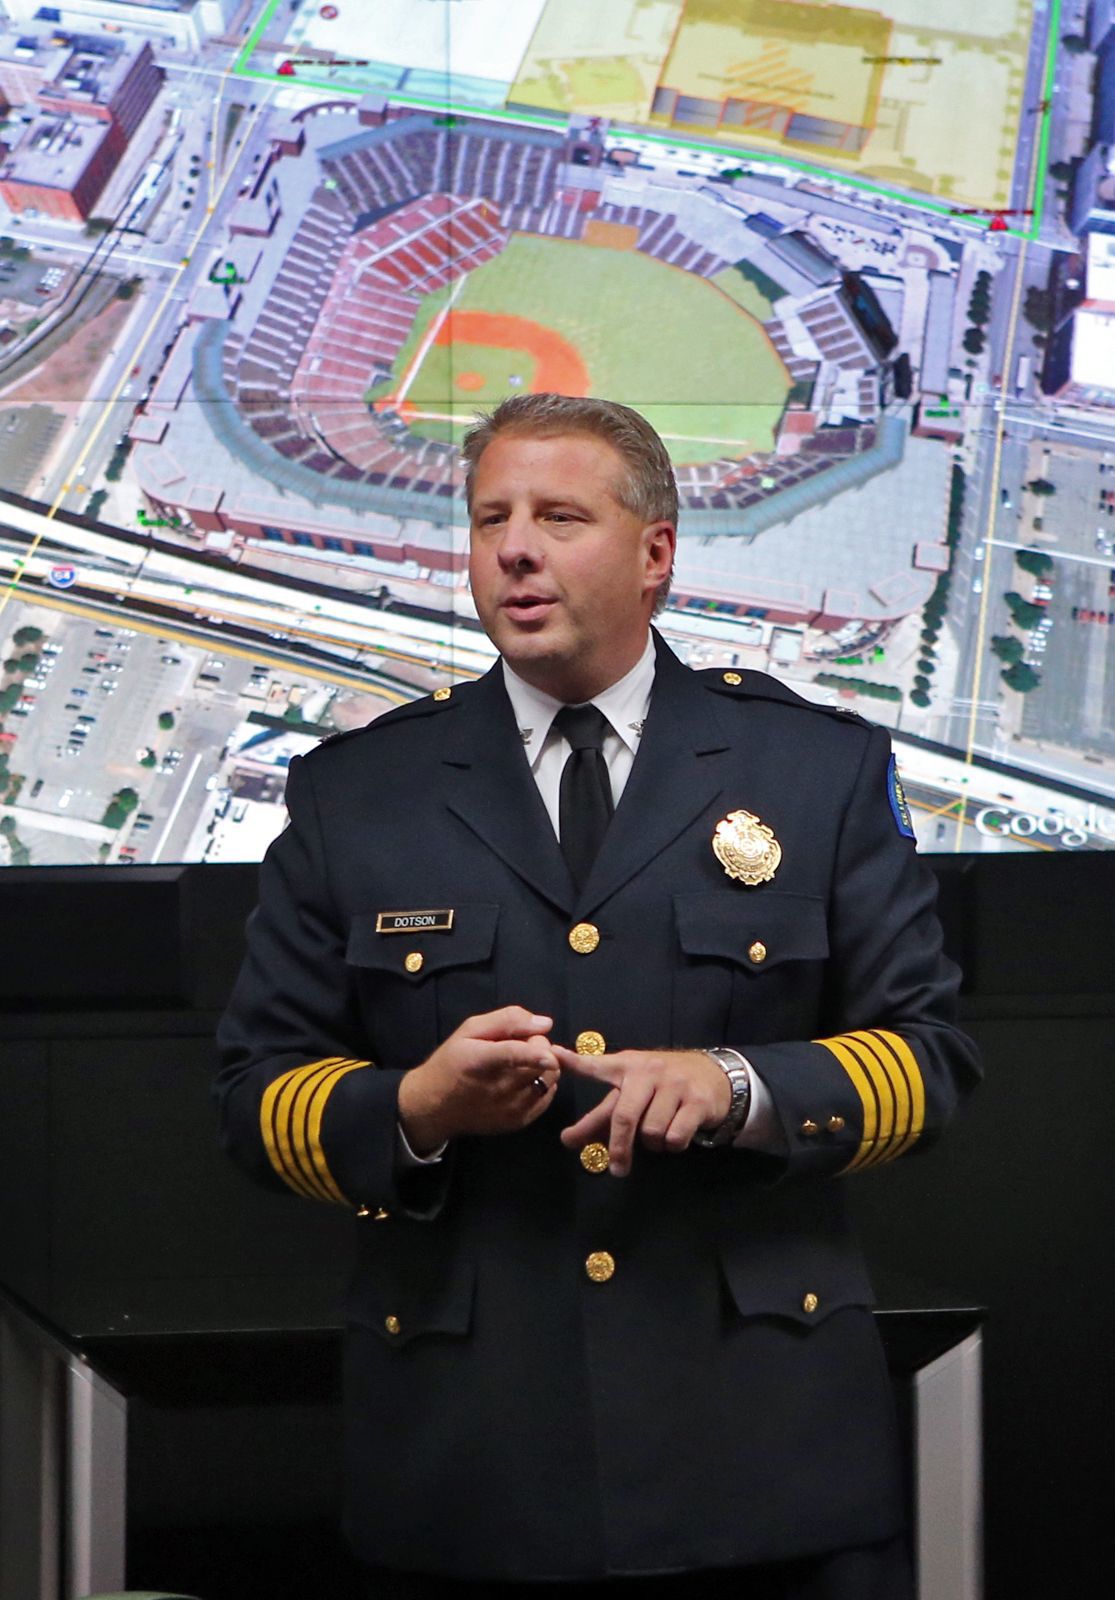 Former St. Louis police chief lands job with Washington Nationals | Law and order | 0